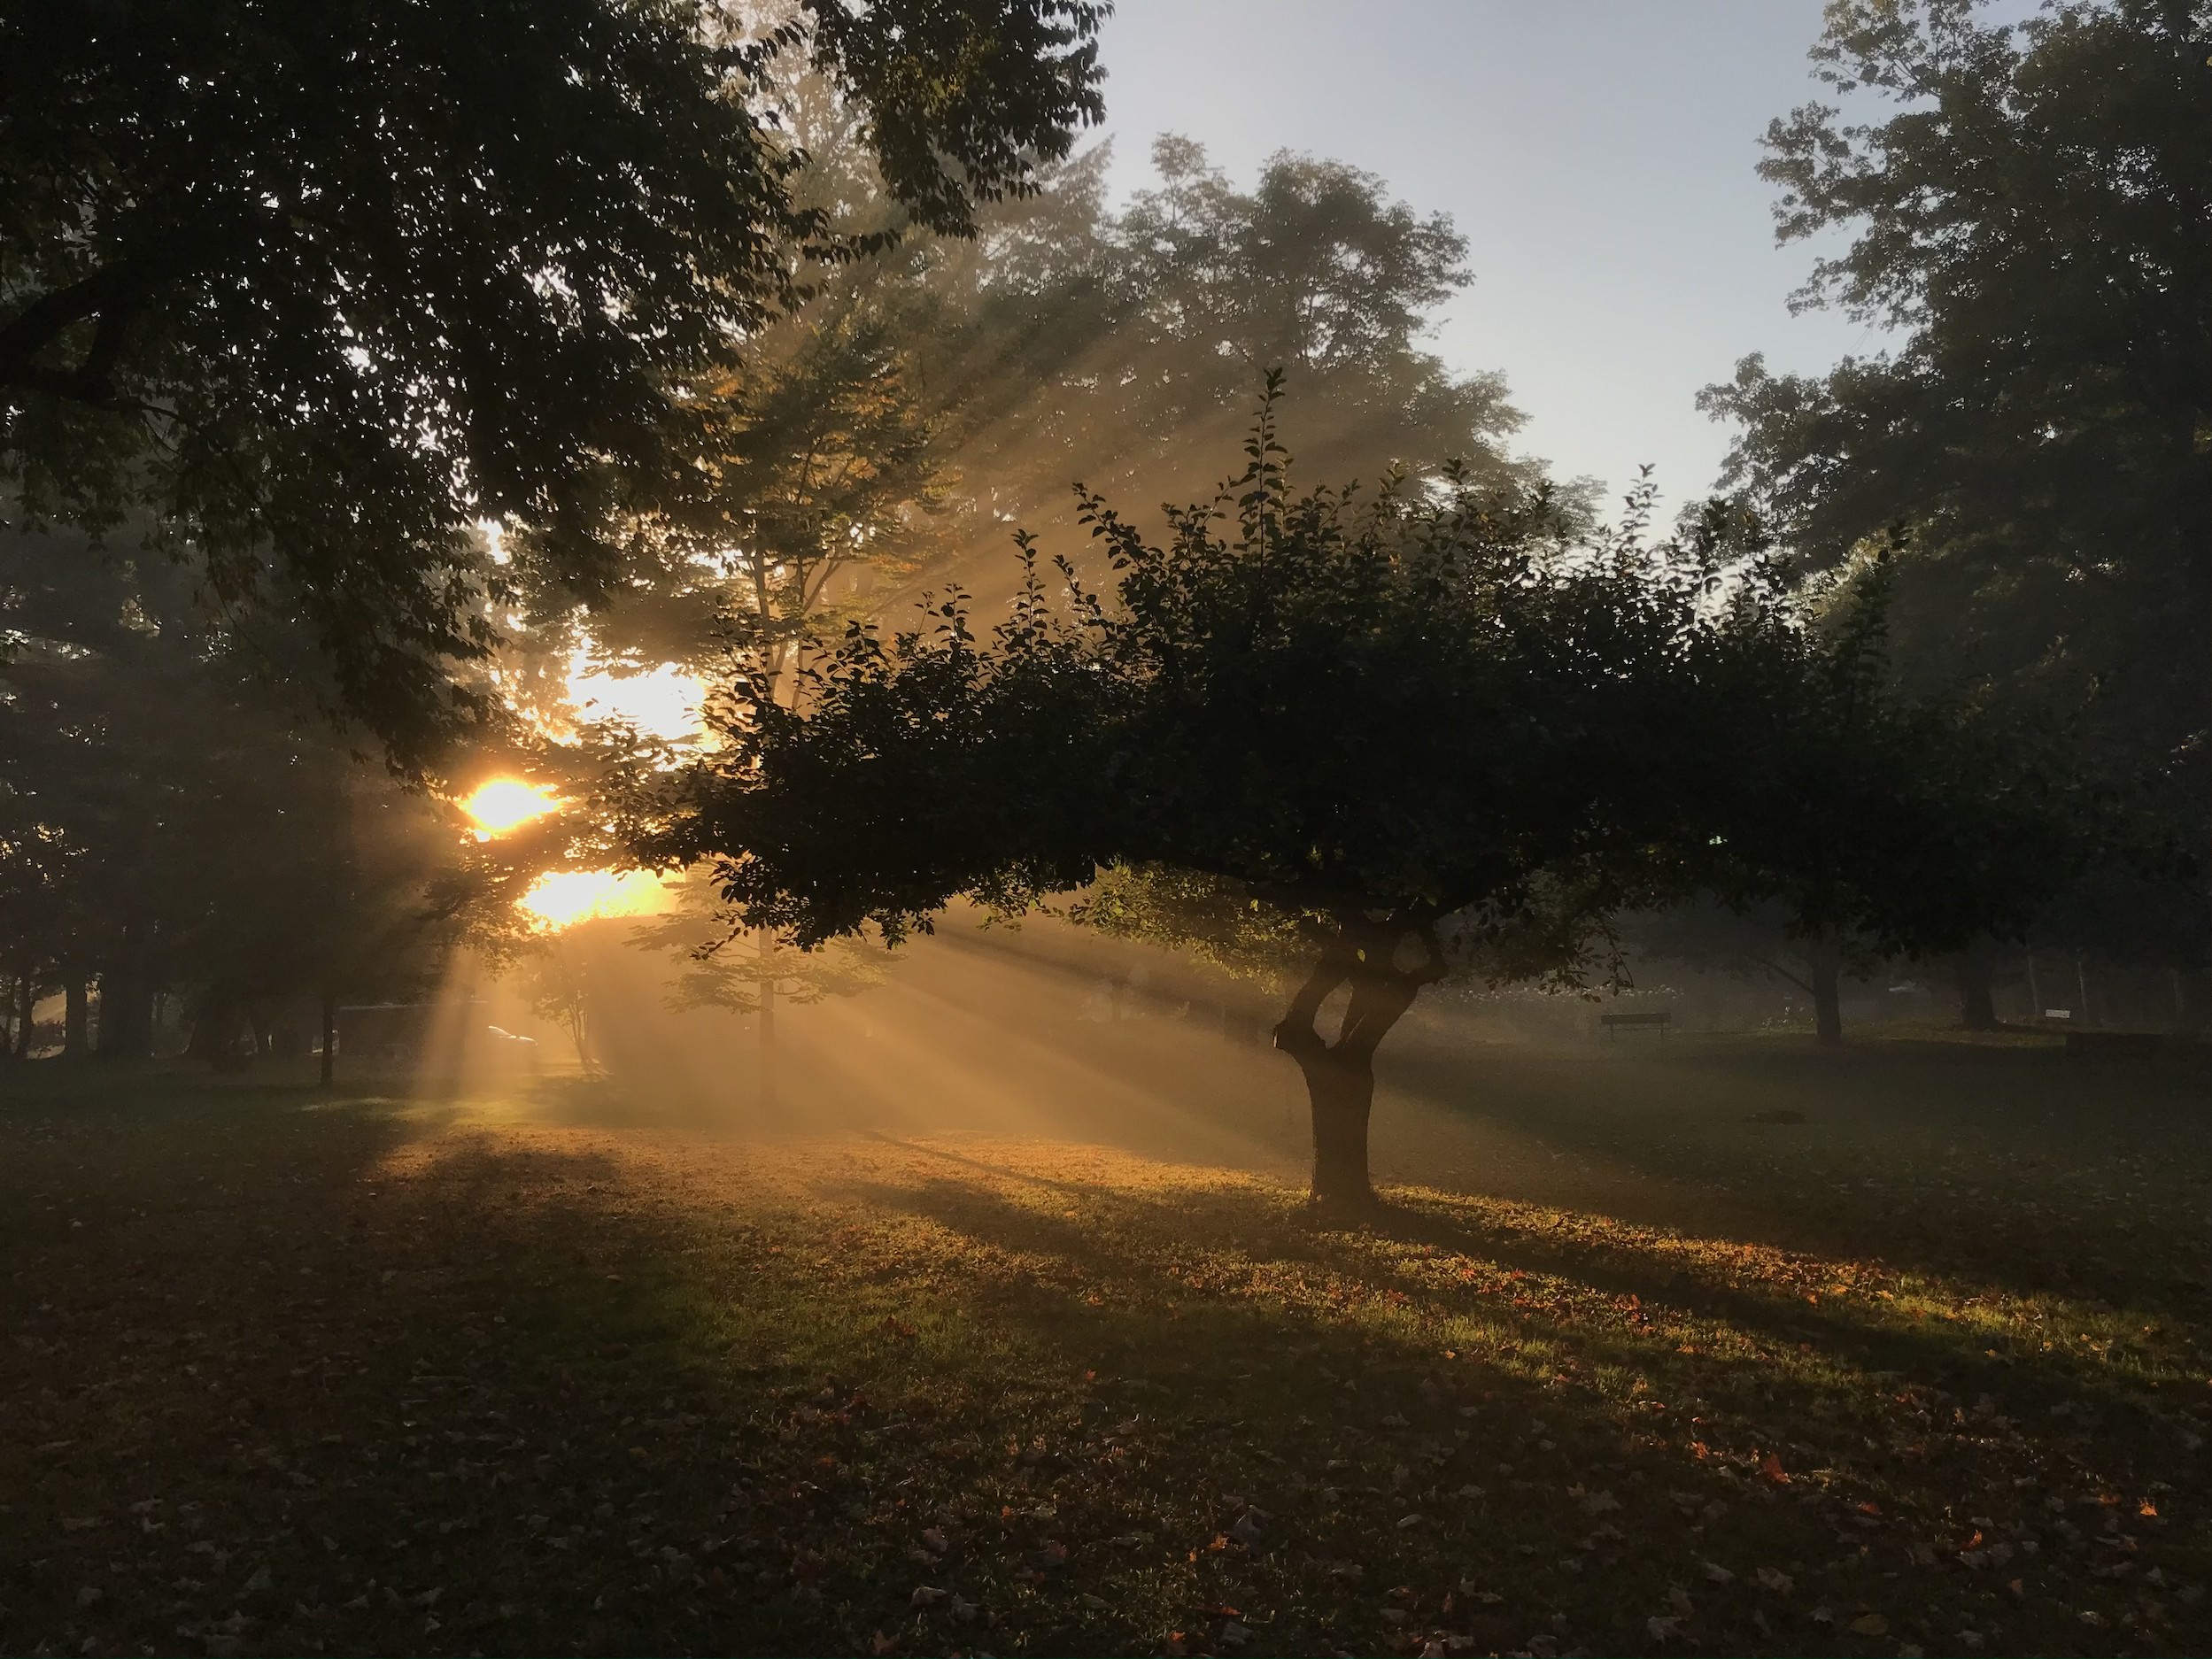 Early mornings, digital image taken on IPhone 7 Plus, by Quincy Biddle